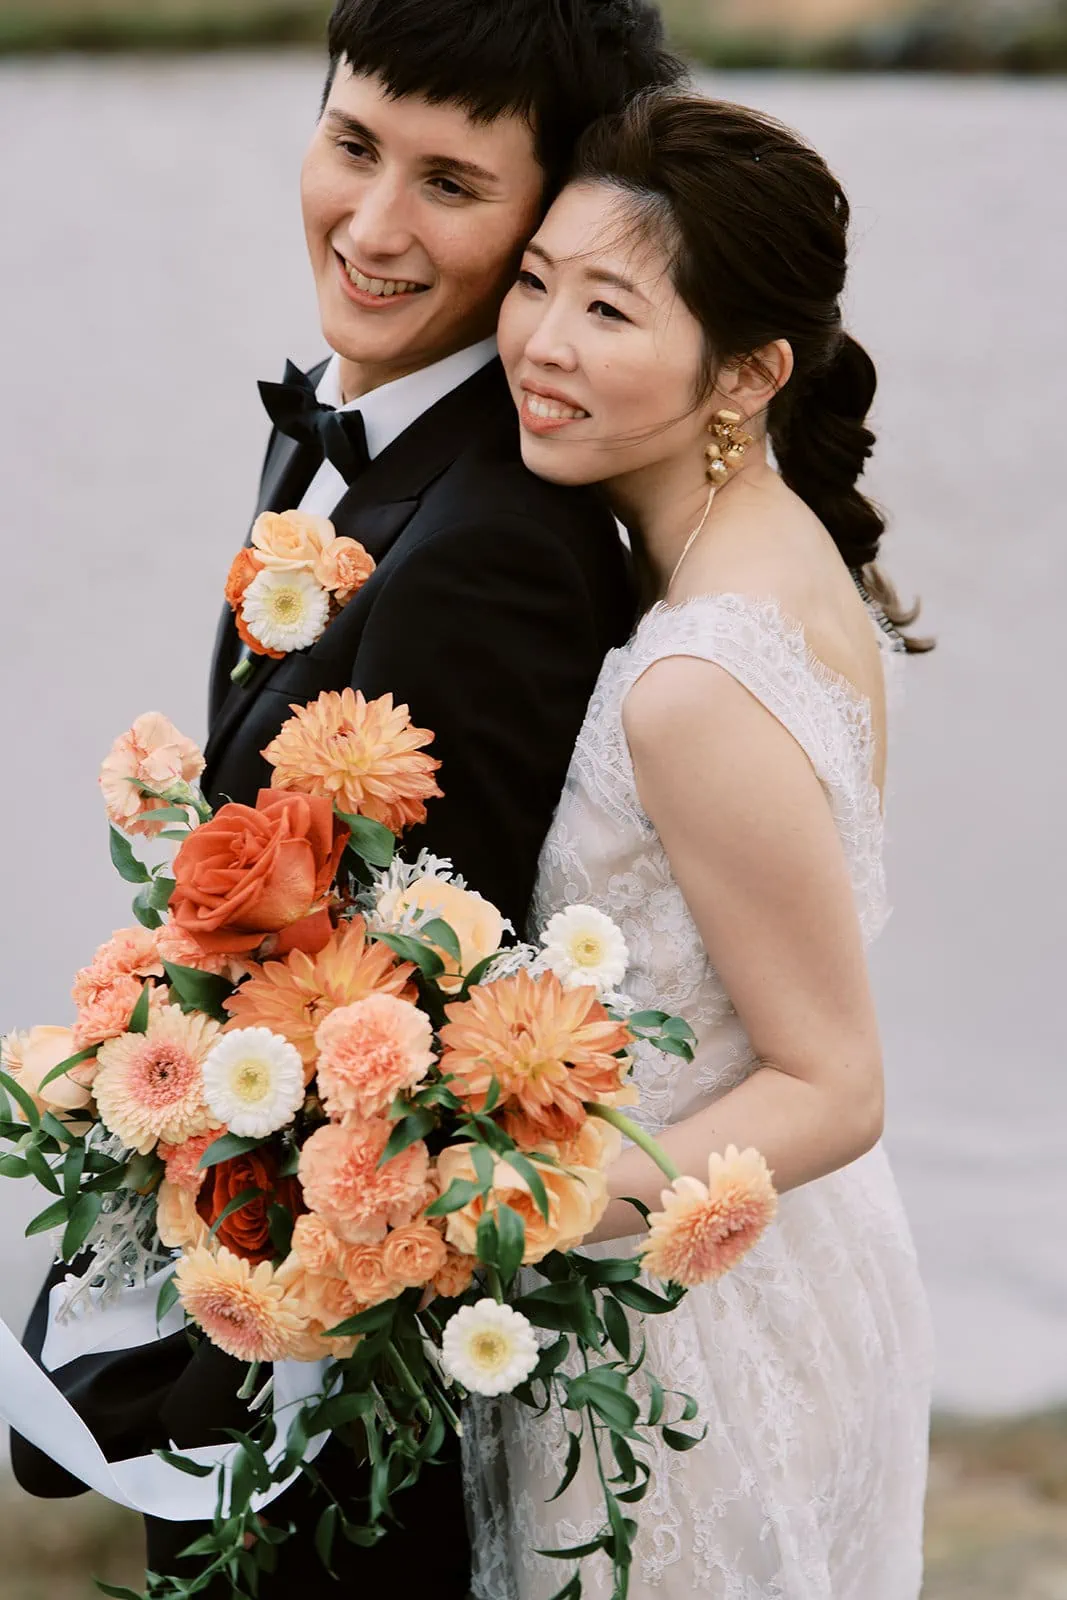 Kyoto Tokyo Japan Elopement Wedding Photographer, Planner & Videographer | A bride and groom smiling while embracing, with the bride holding a bouquet of orange flowers, captured beautifully by Yuri, a renowned Japan Wedding Photographer.